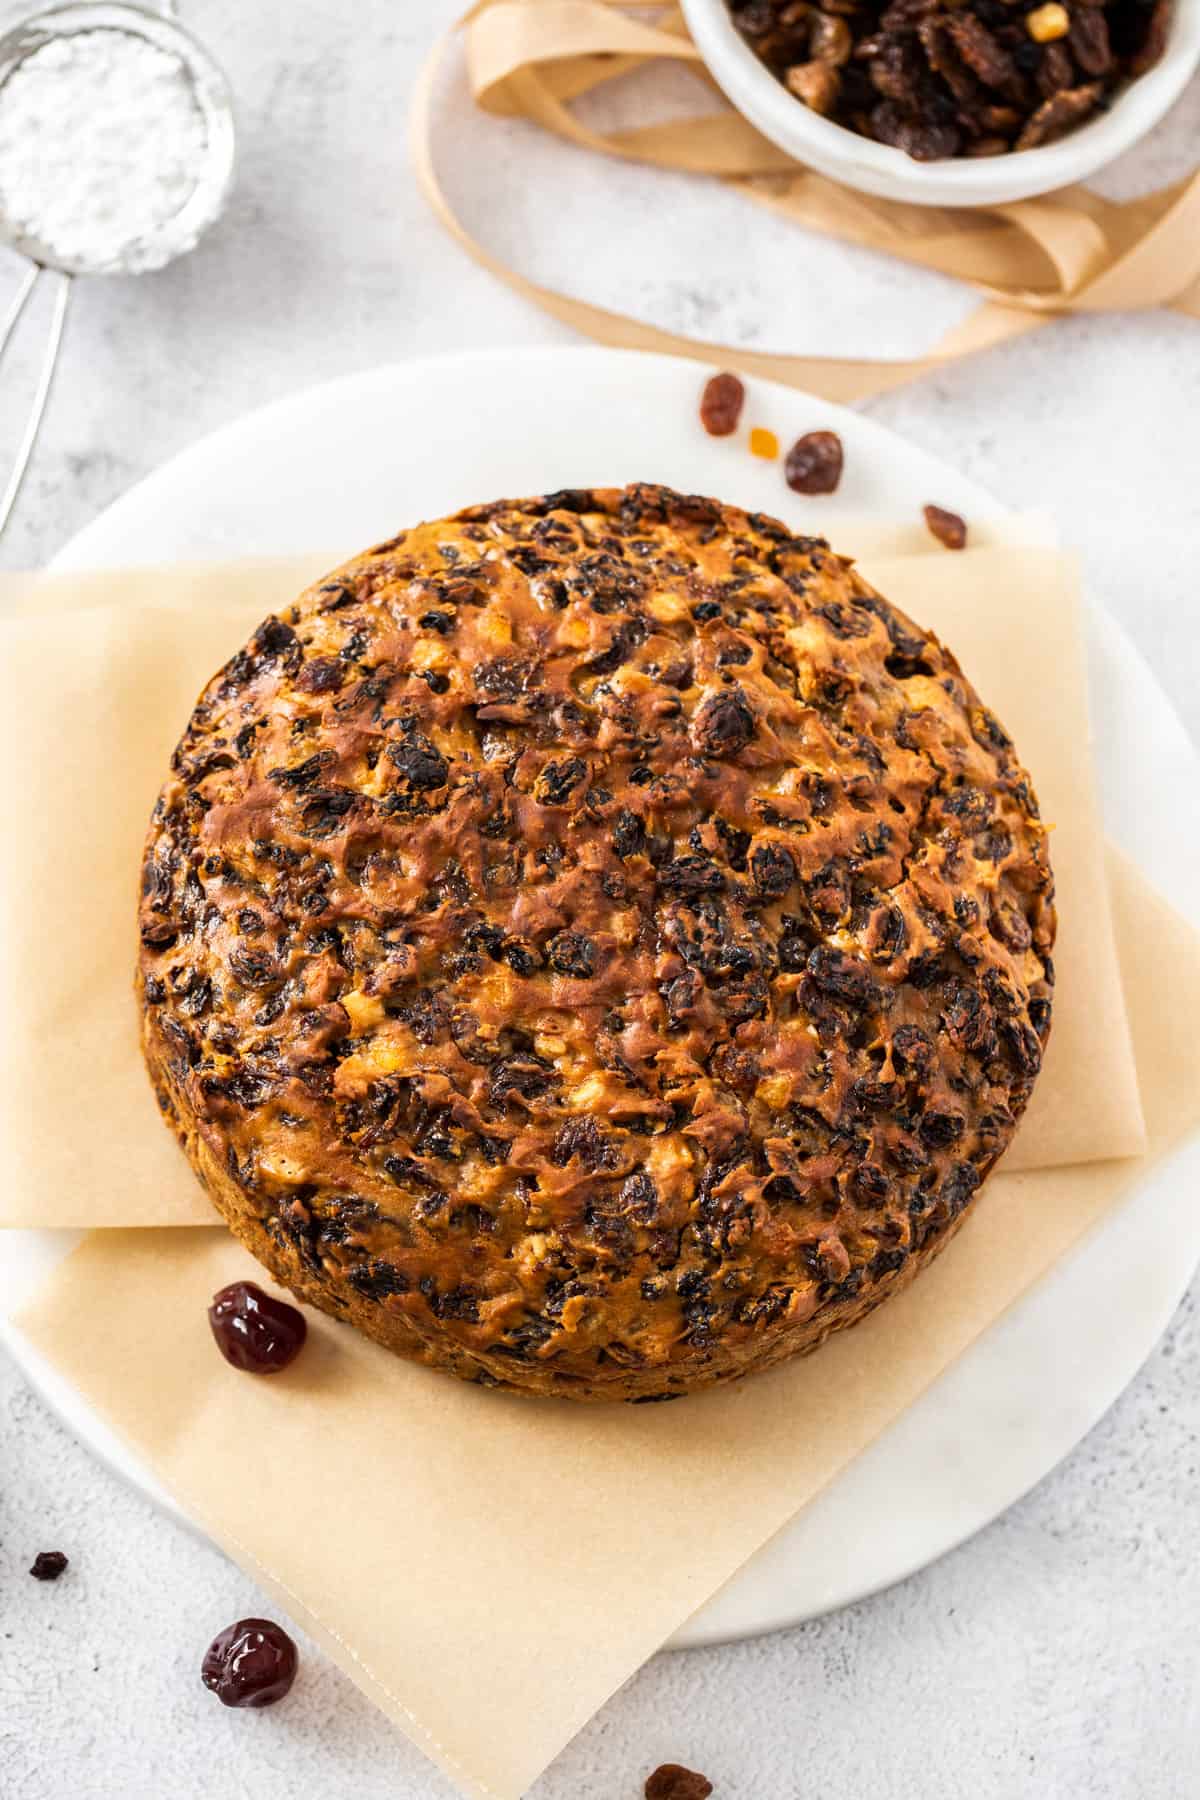 whole fruit cake sitting on some baking paper on a round white plate.